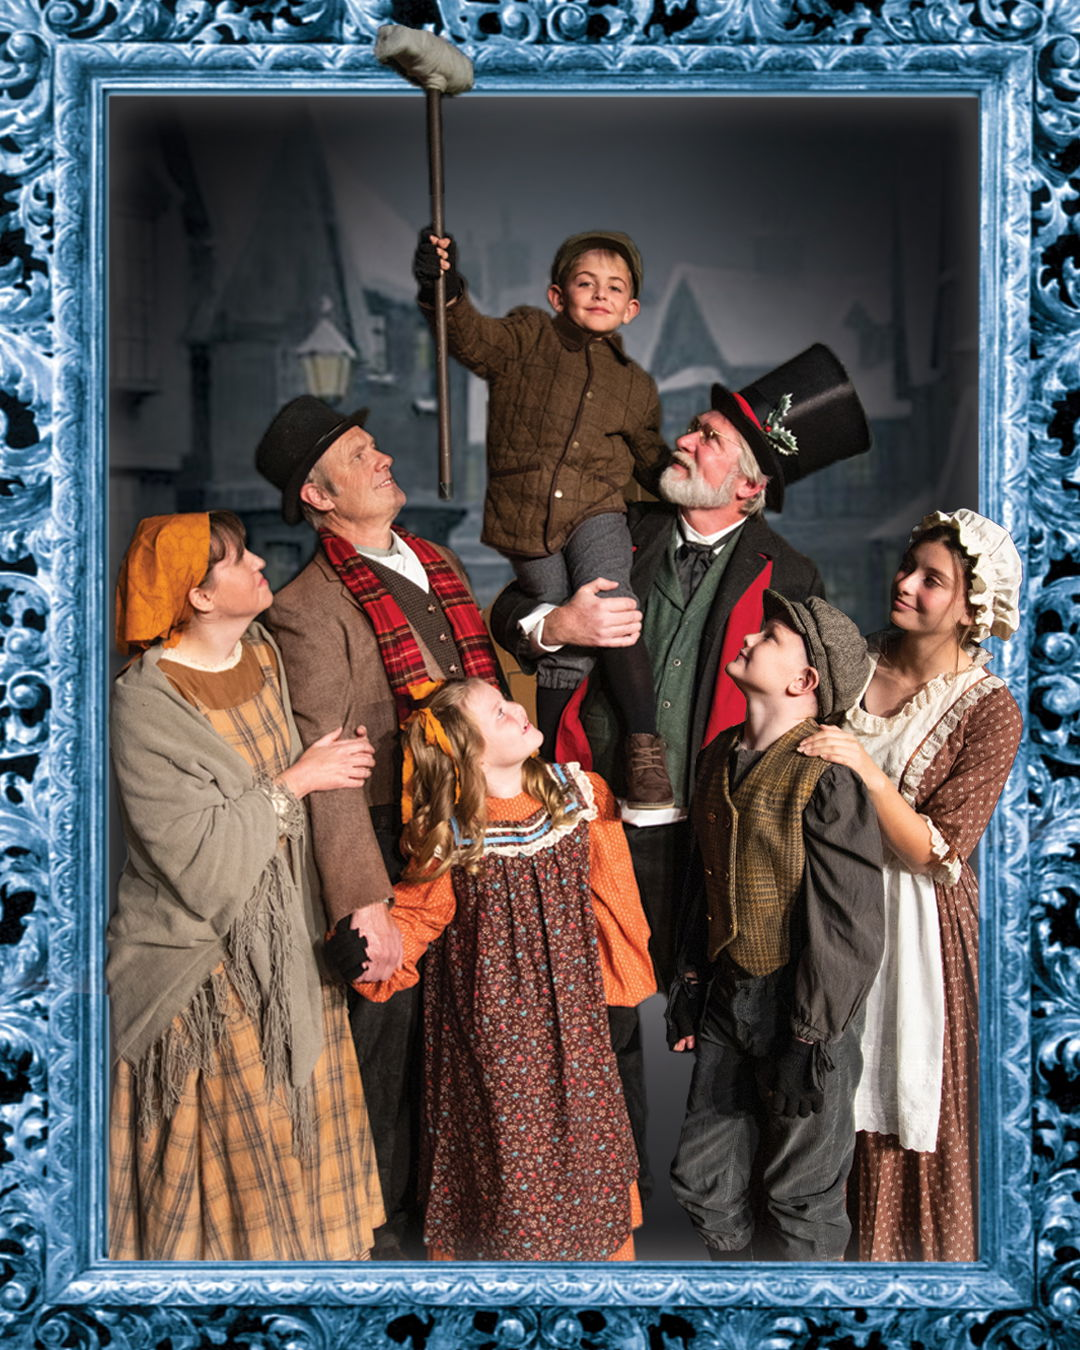 "A Christmas Carol" - Theatre Of Northeastern Connecticut, Inc. at the Bradley Playhouse (Putnam, CT) - REVIEW